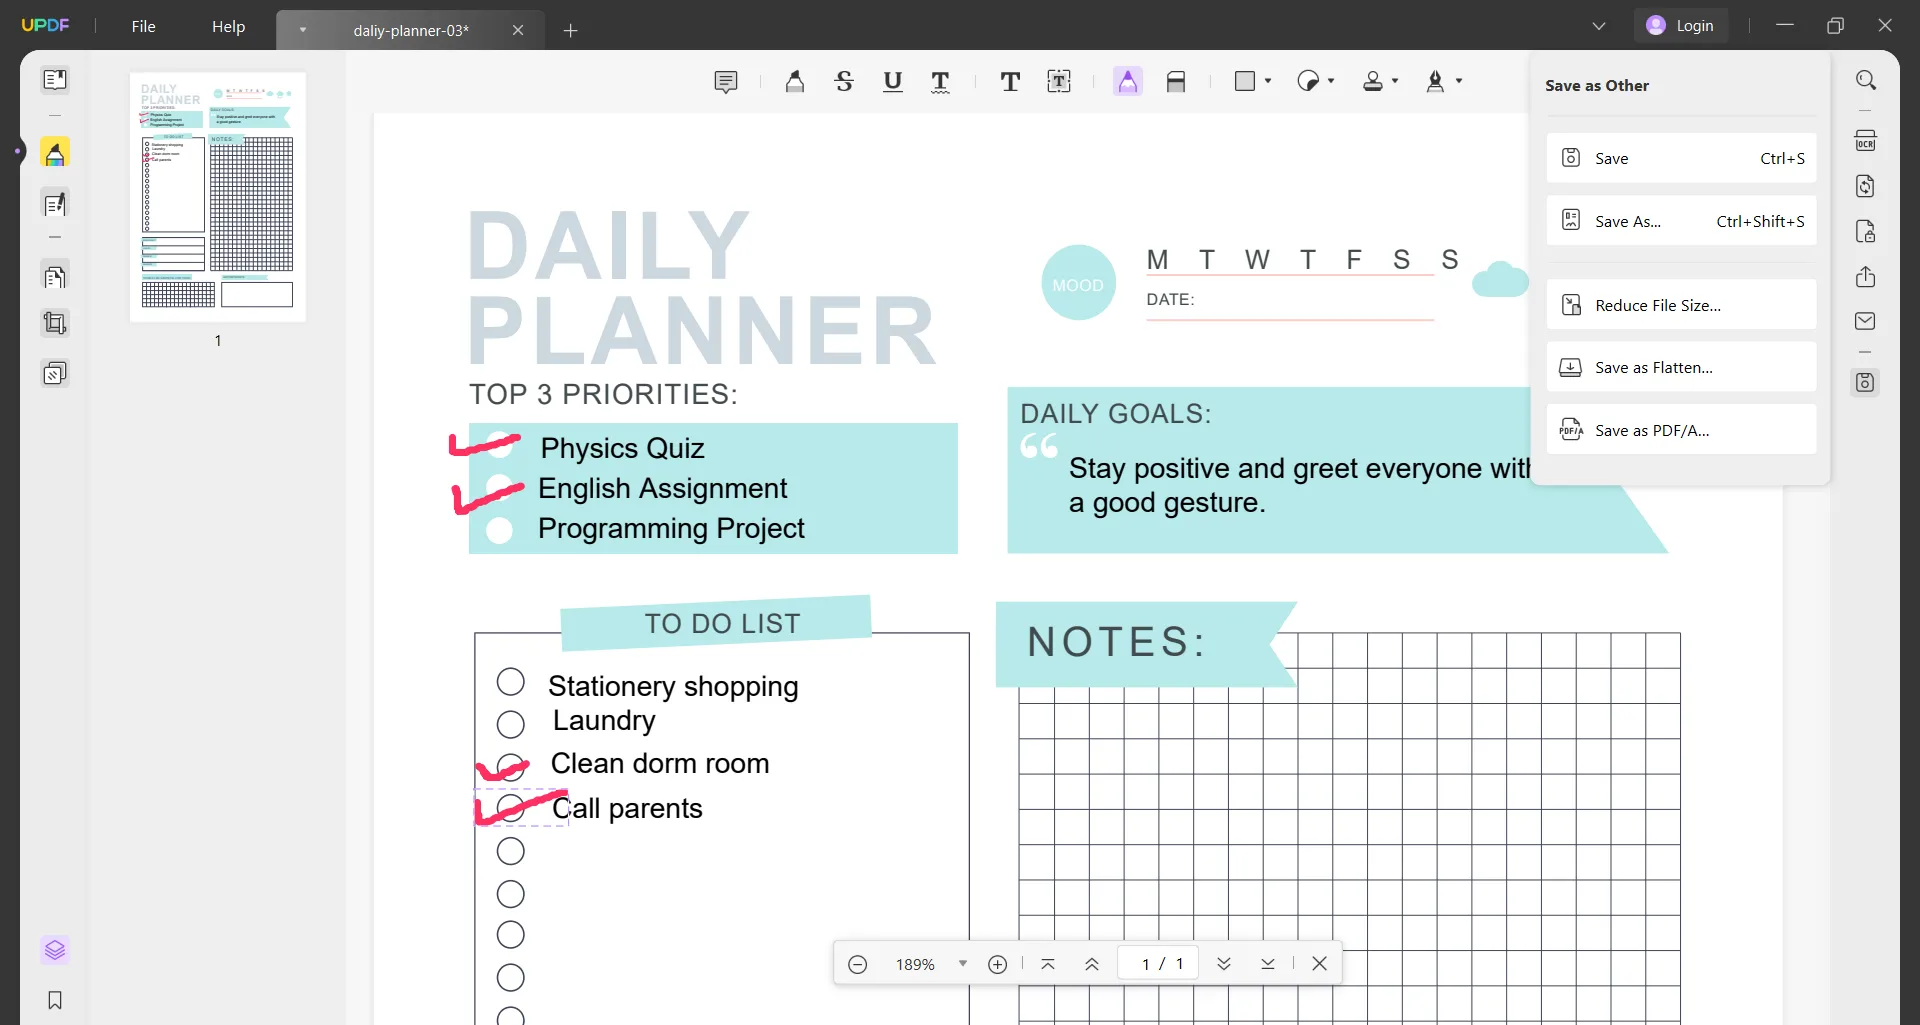 planner app annotate and save plan